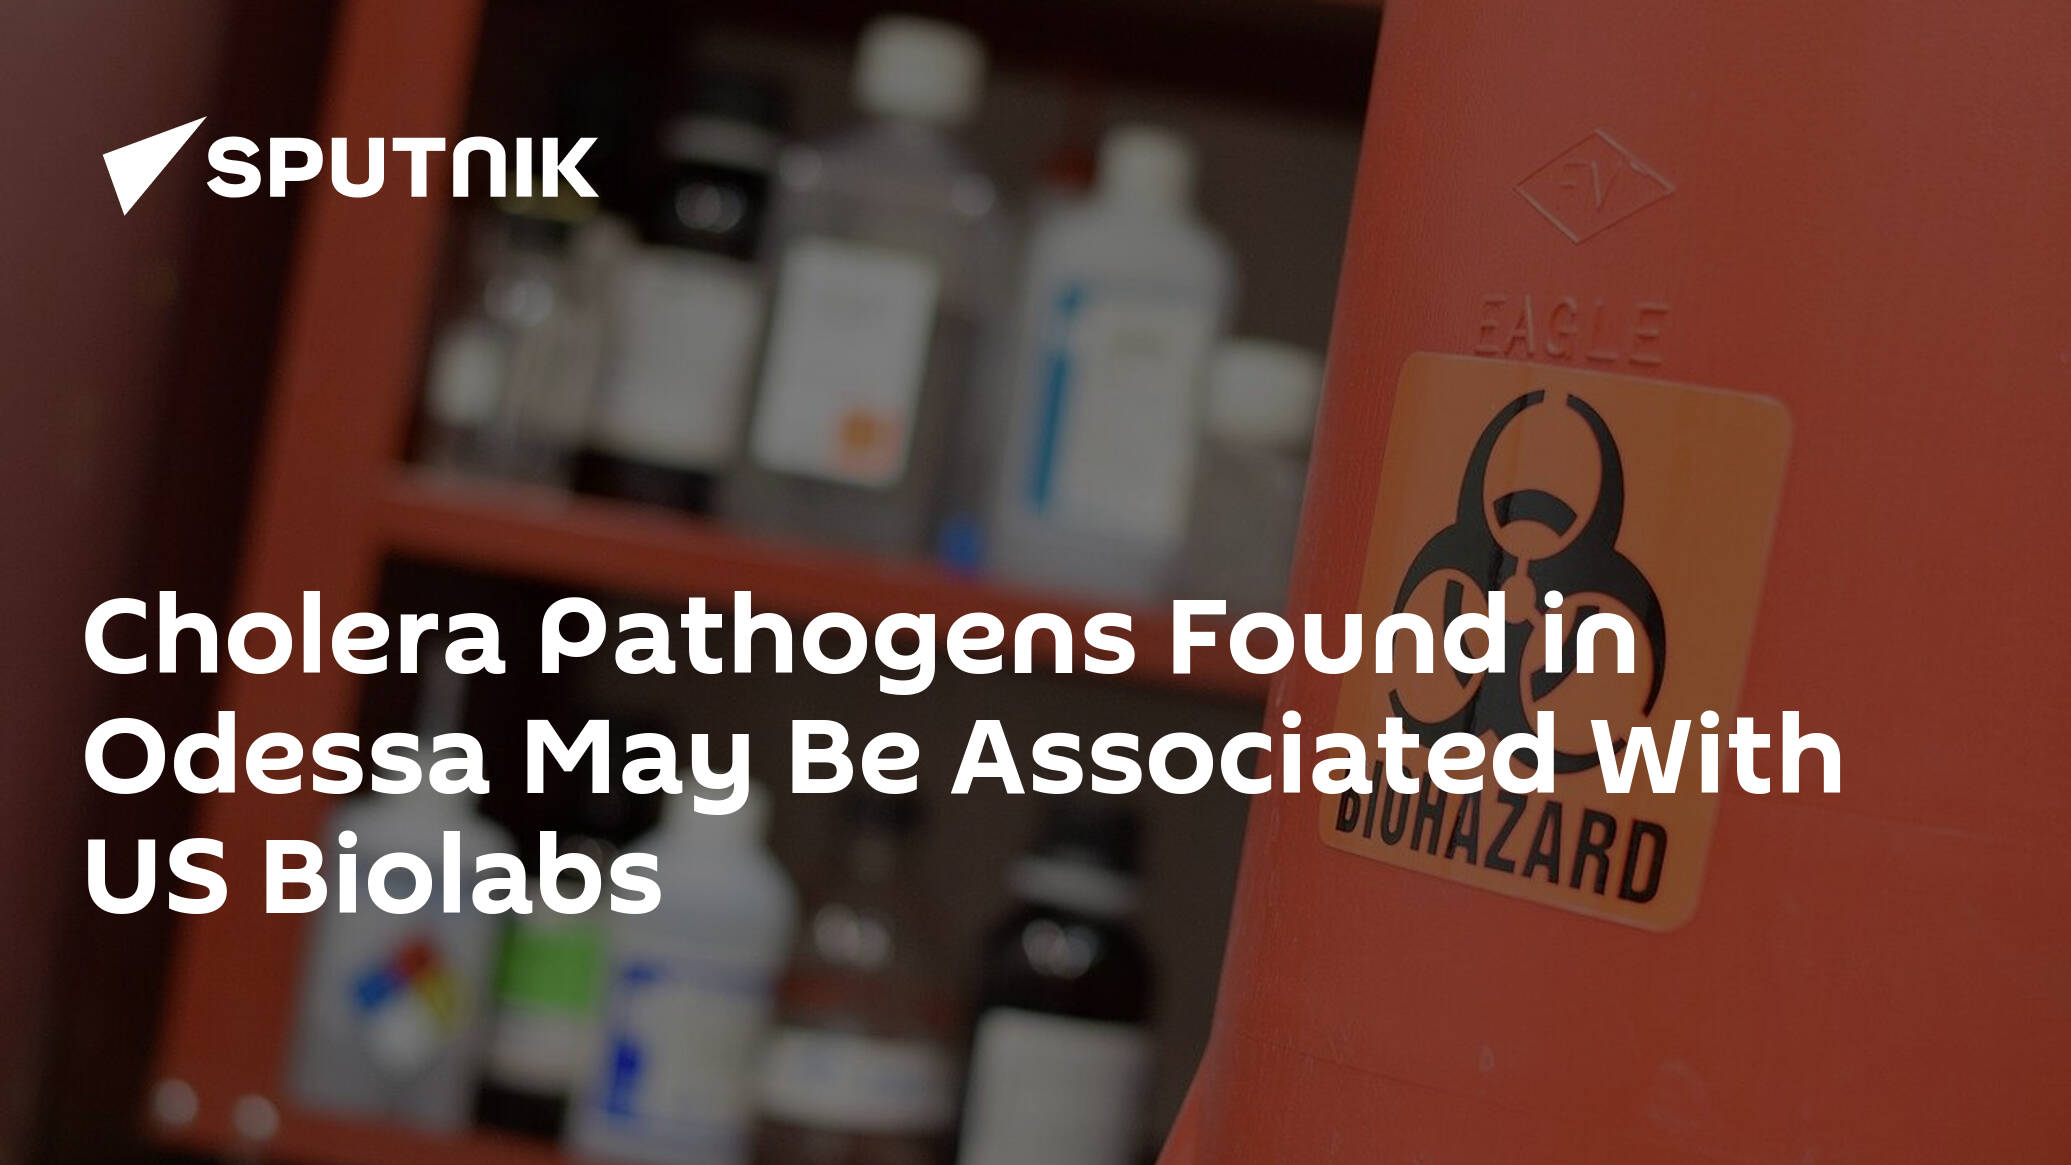 Cholera Pathogens Found in Odessa May Be Associated With US Biolabs